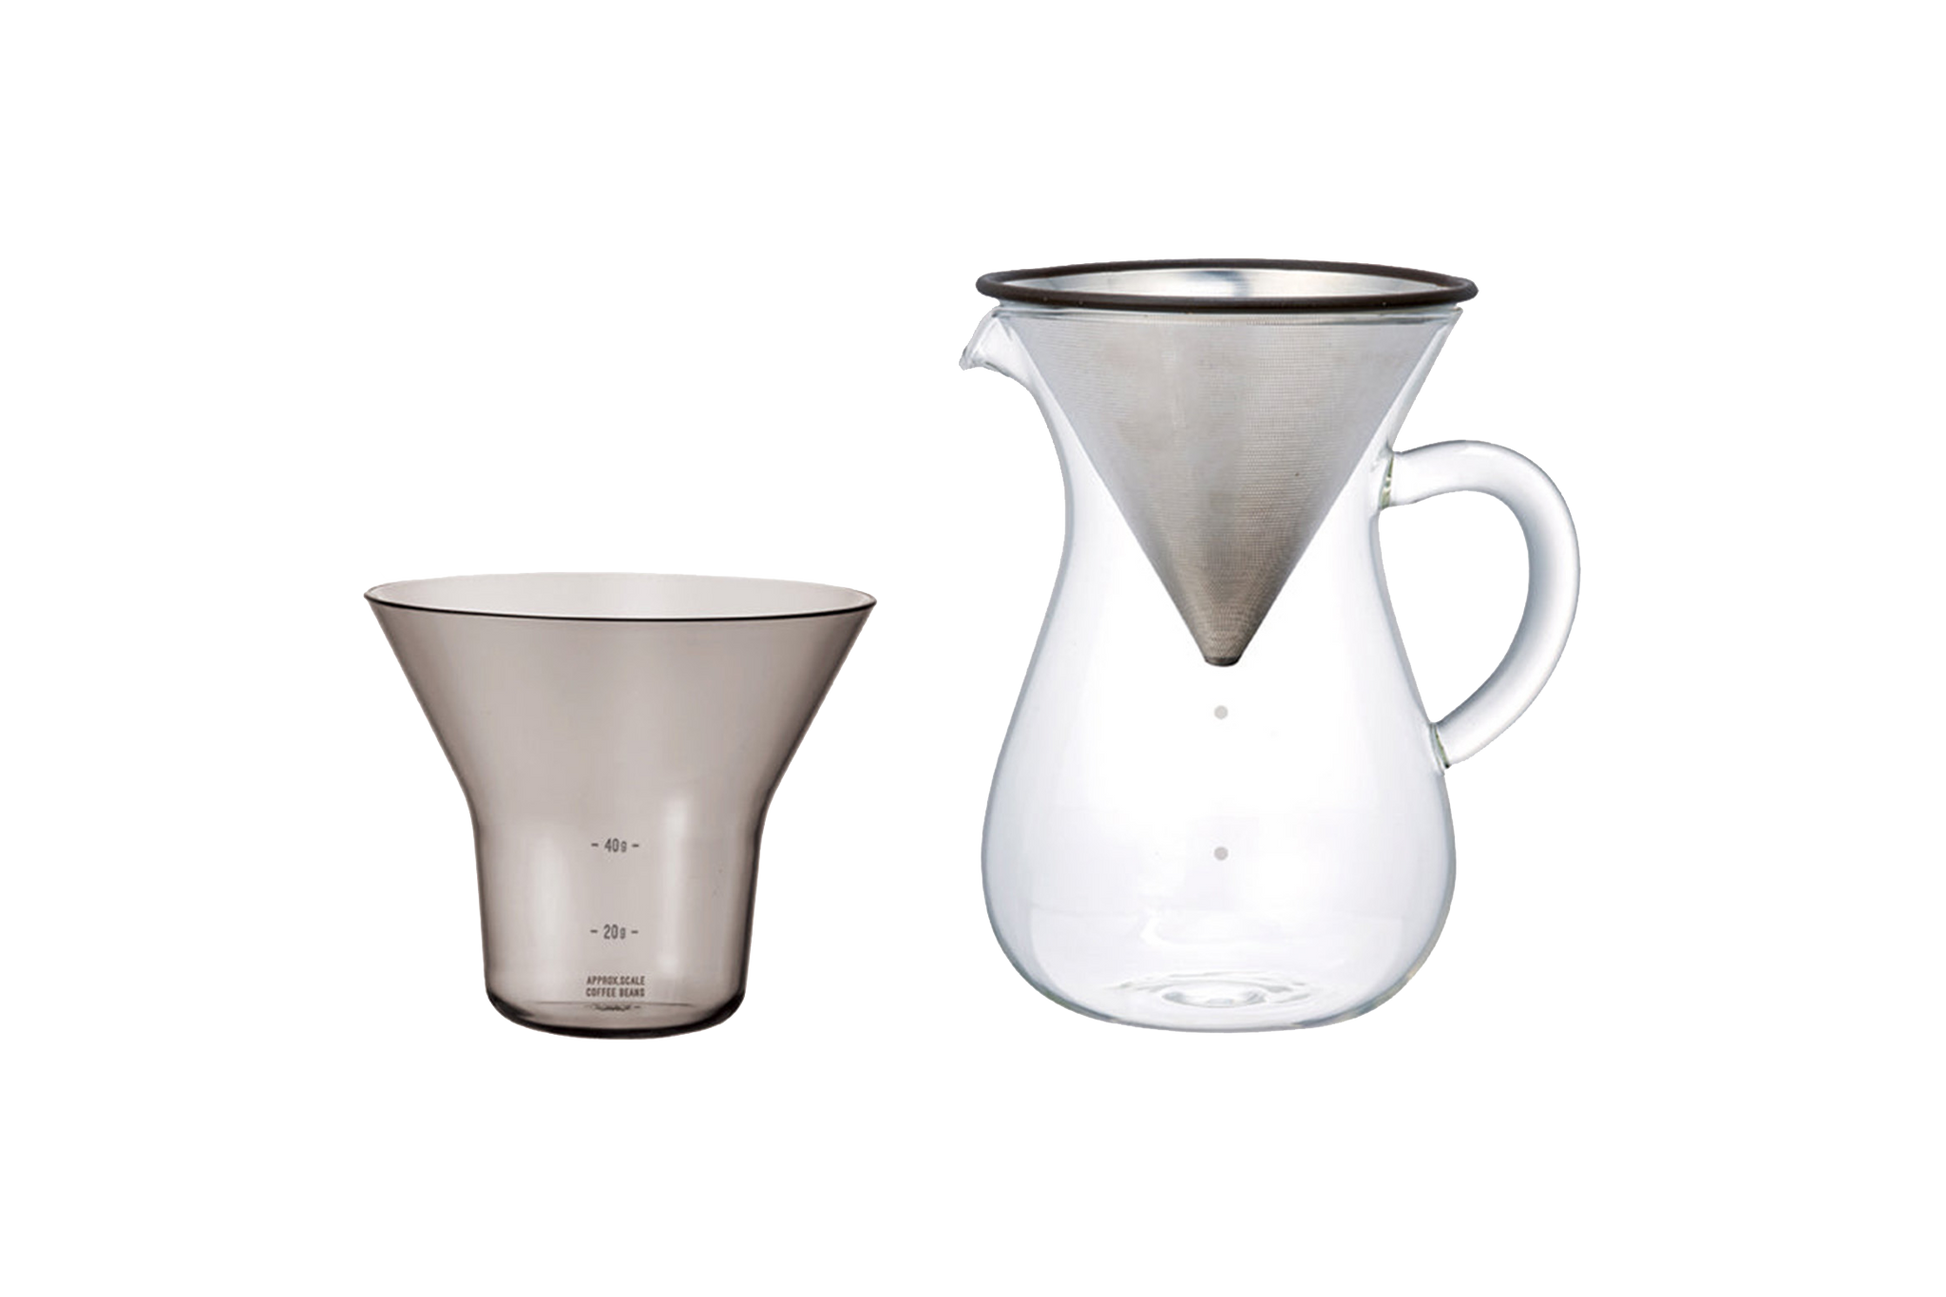 Everything you need to brew & serve delicious cups of filter coffee for up to 4 people. 